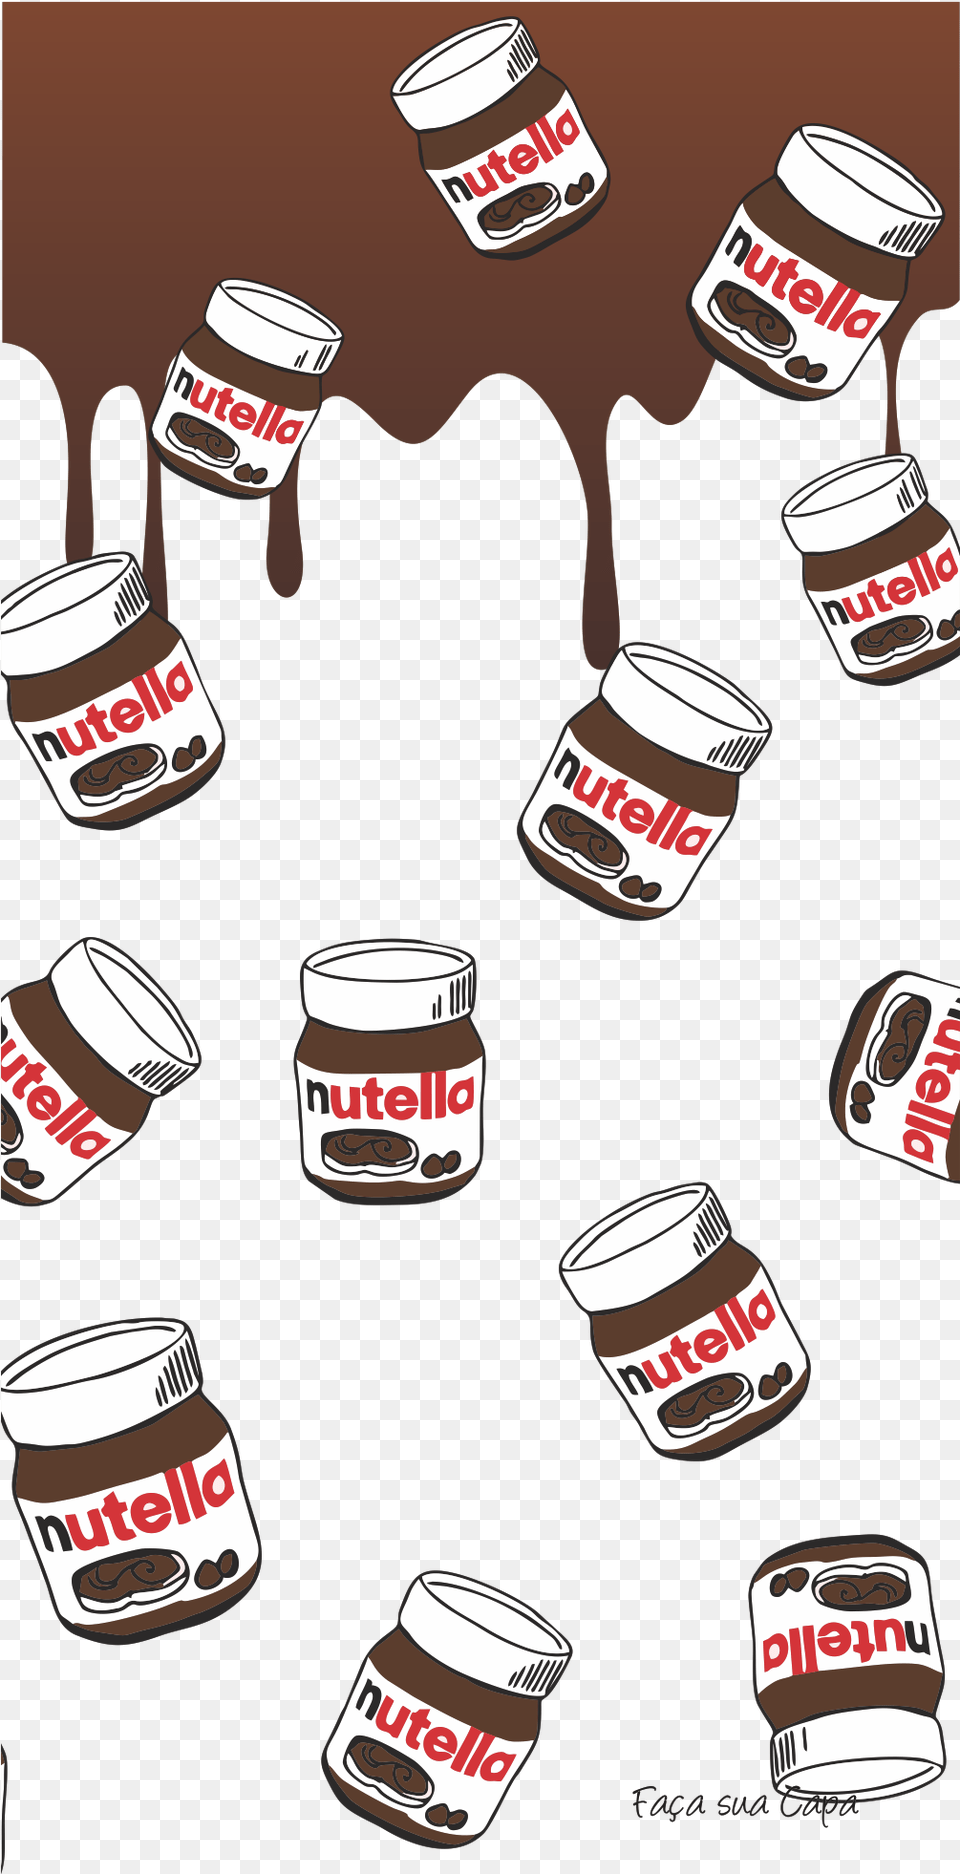 Nutella Cool Iphone Backgrounds Iphone Wallpaper Food Nutella Background, Aluminium, Tin, Can, Canned Goods Png Image